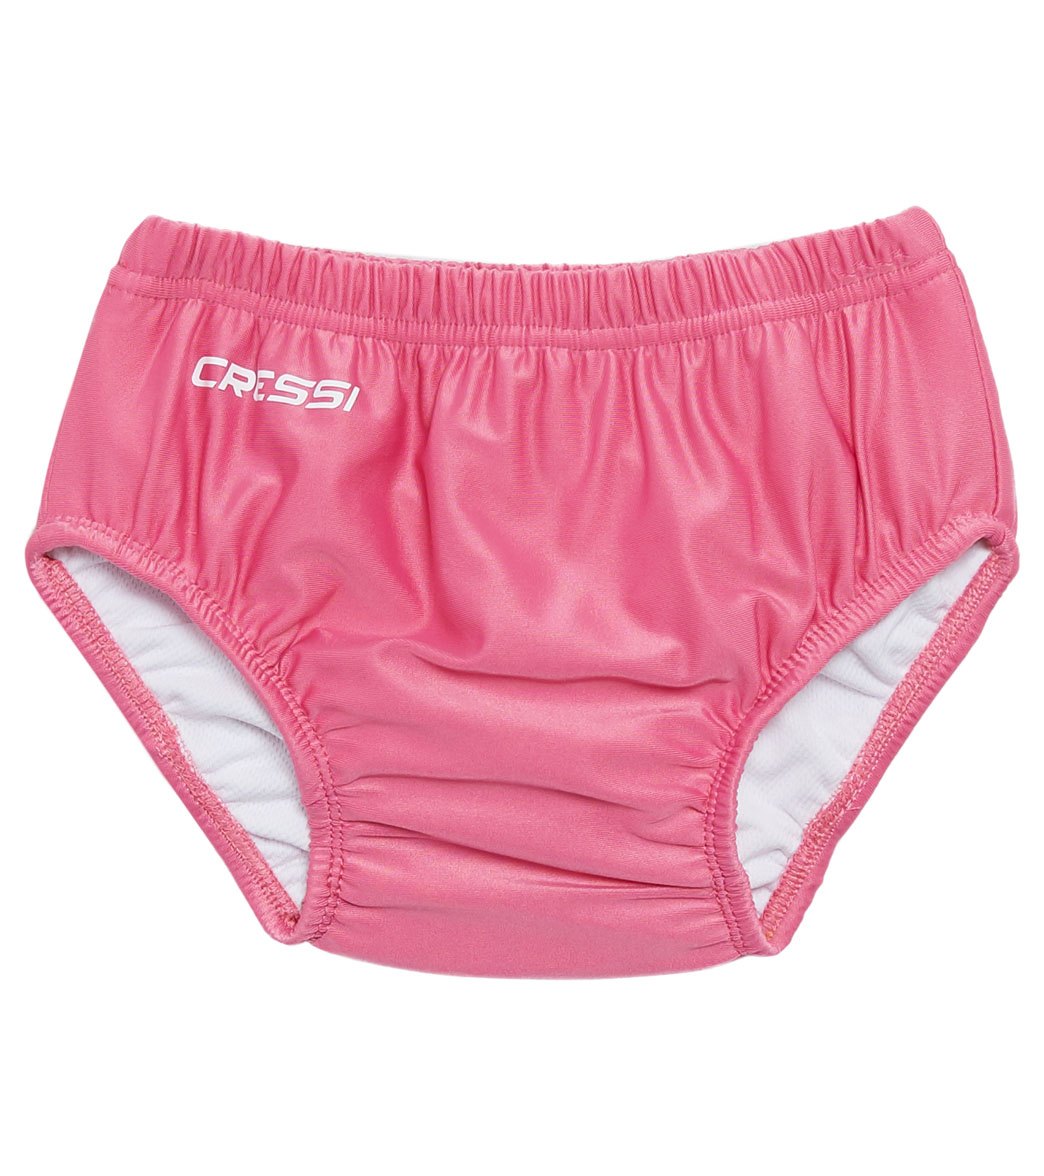 Cressi Reusable Swim Diaper Baby - Pink Small 6-9 Months - Swimoutlet.com